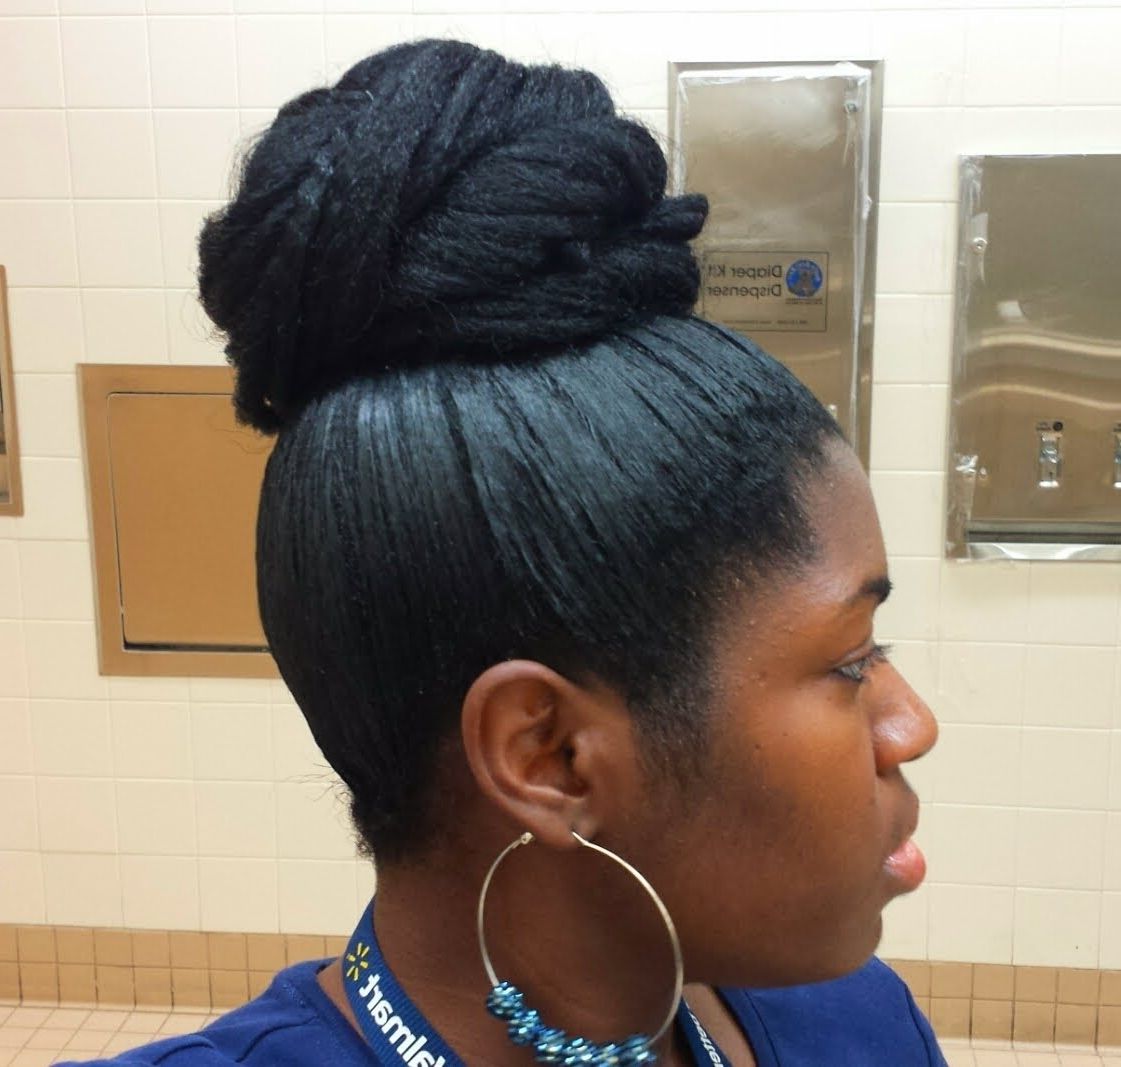 Top Knot Bun Using Marley Braid Hair | Relaxed Hair – Youtube Pertaining To Updo Hairstyles For Permed Hair (View 15 of 15)